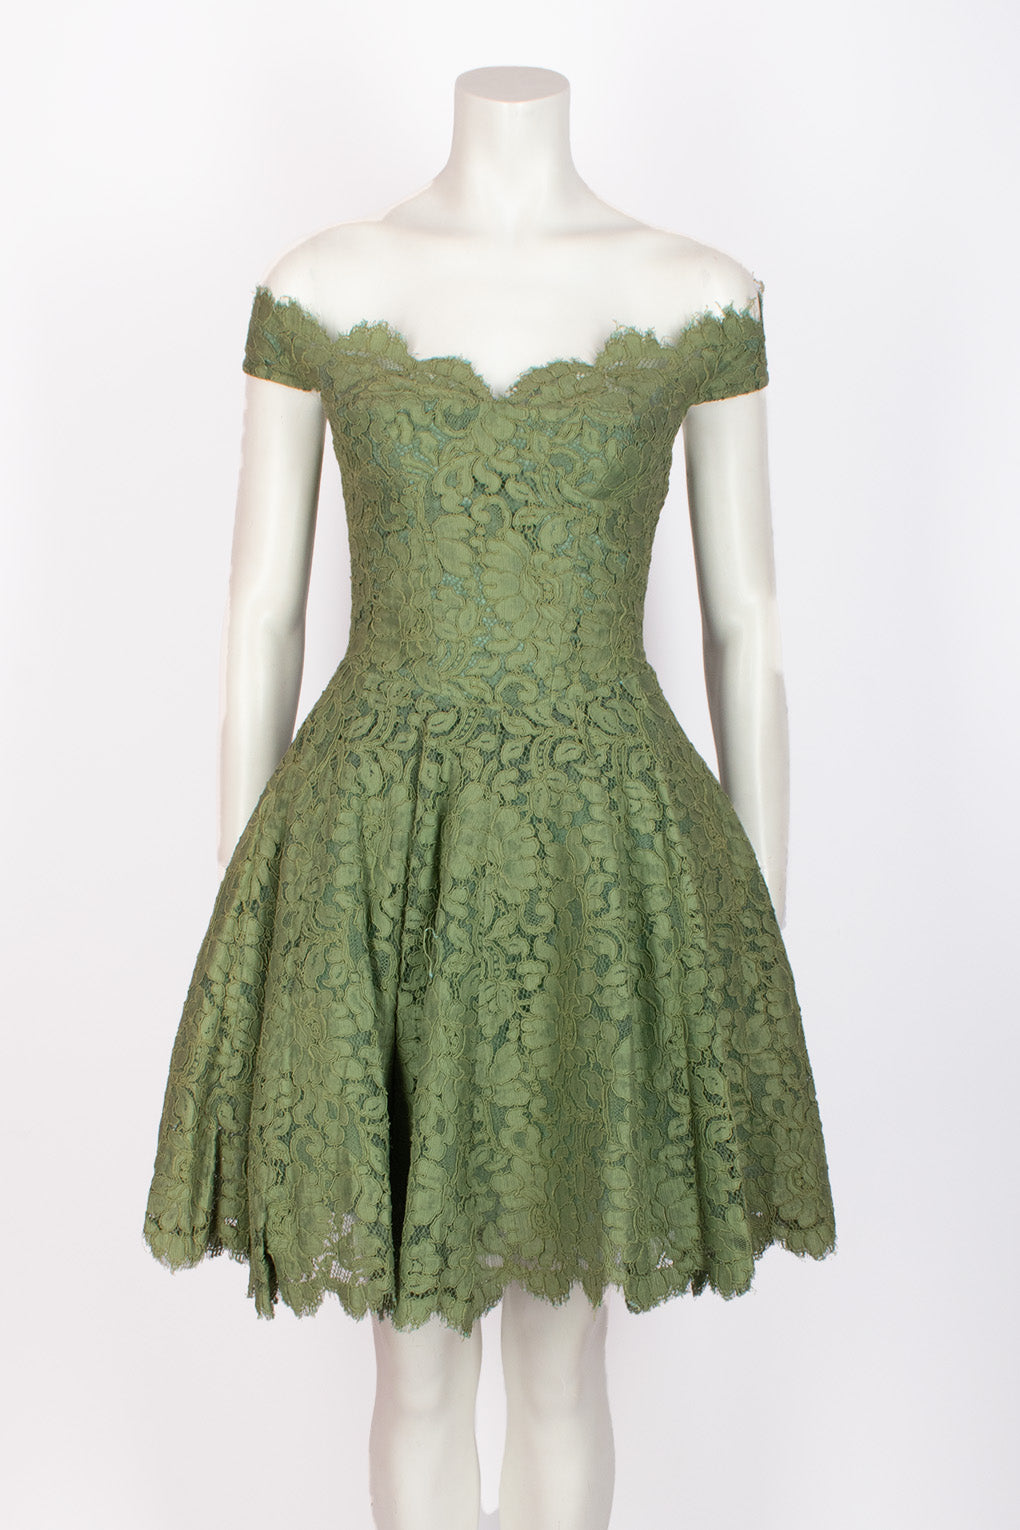 ANTONY PRICE Corseted Green Lace Dress